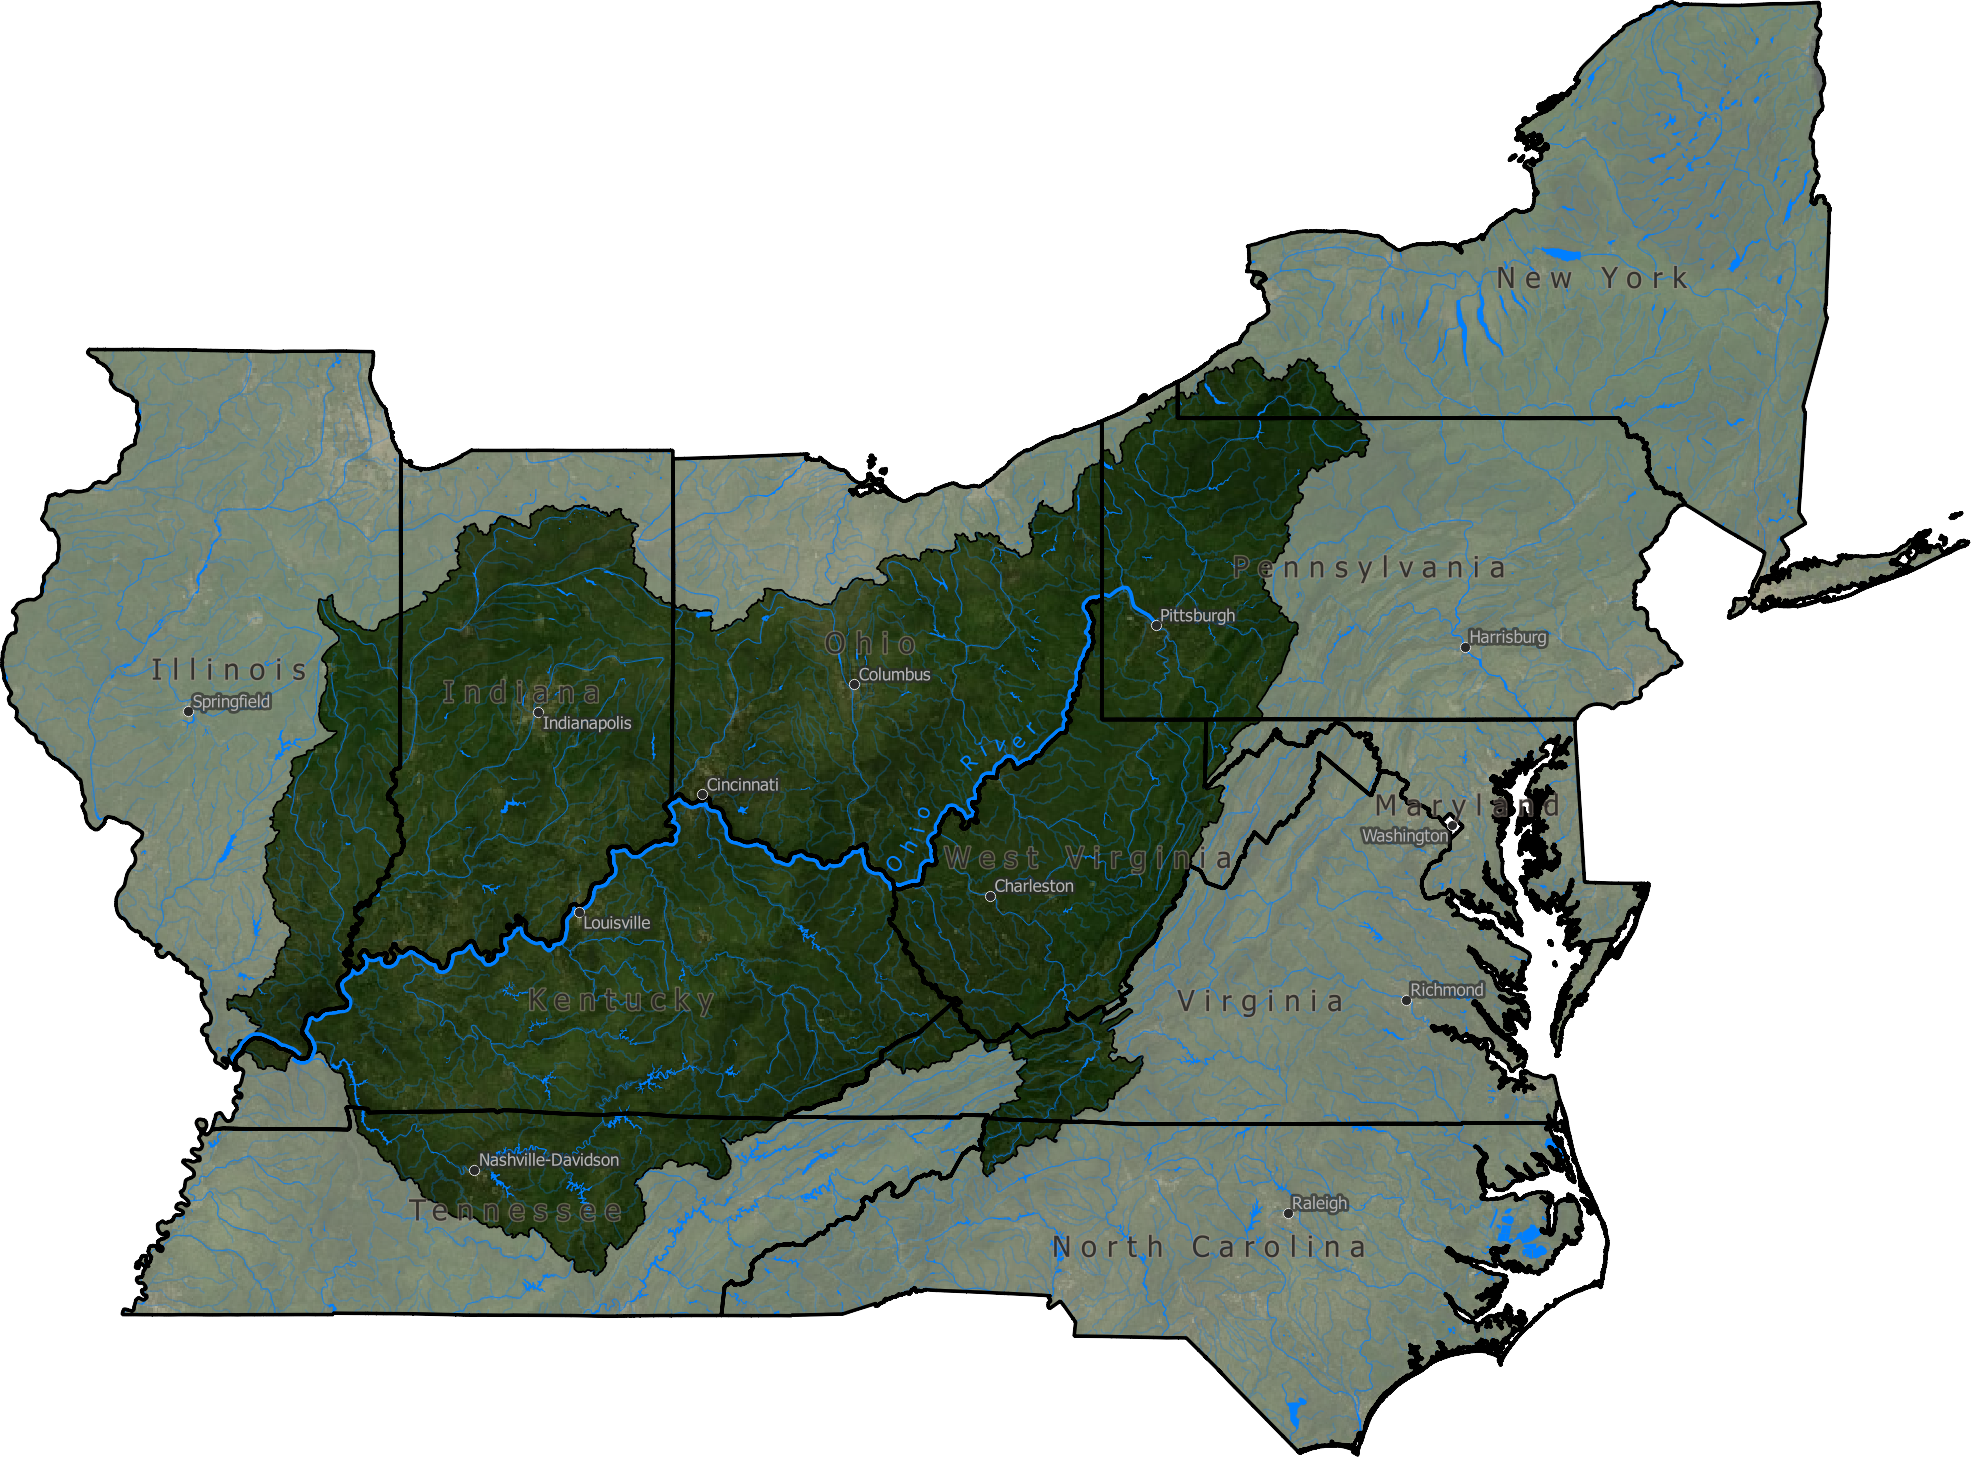 Ohio river watershed